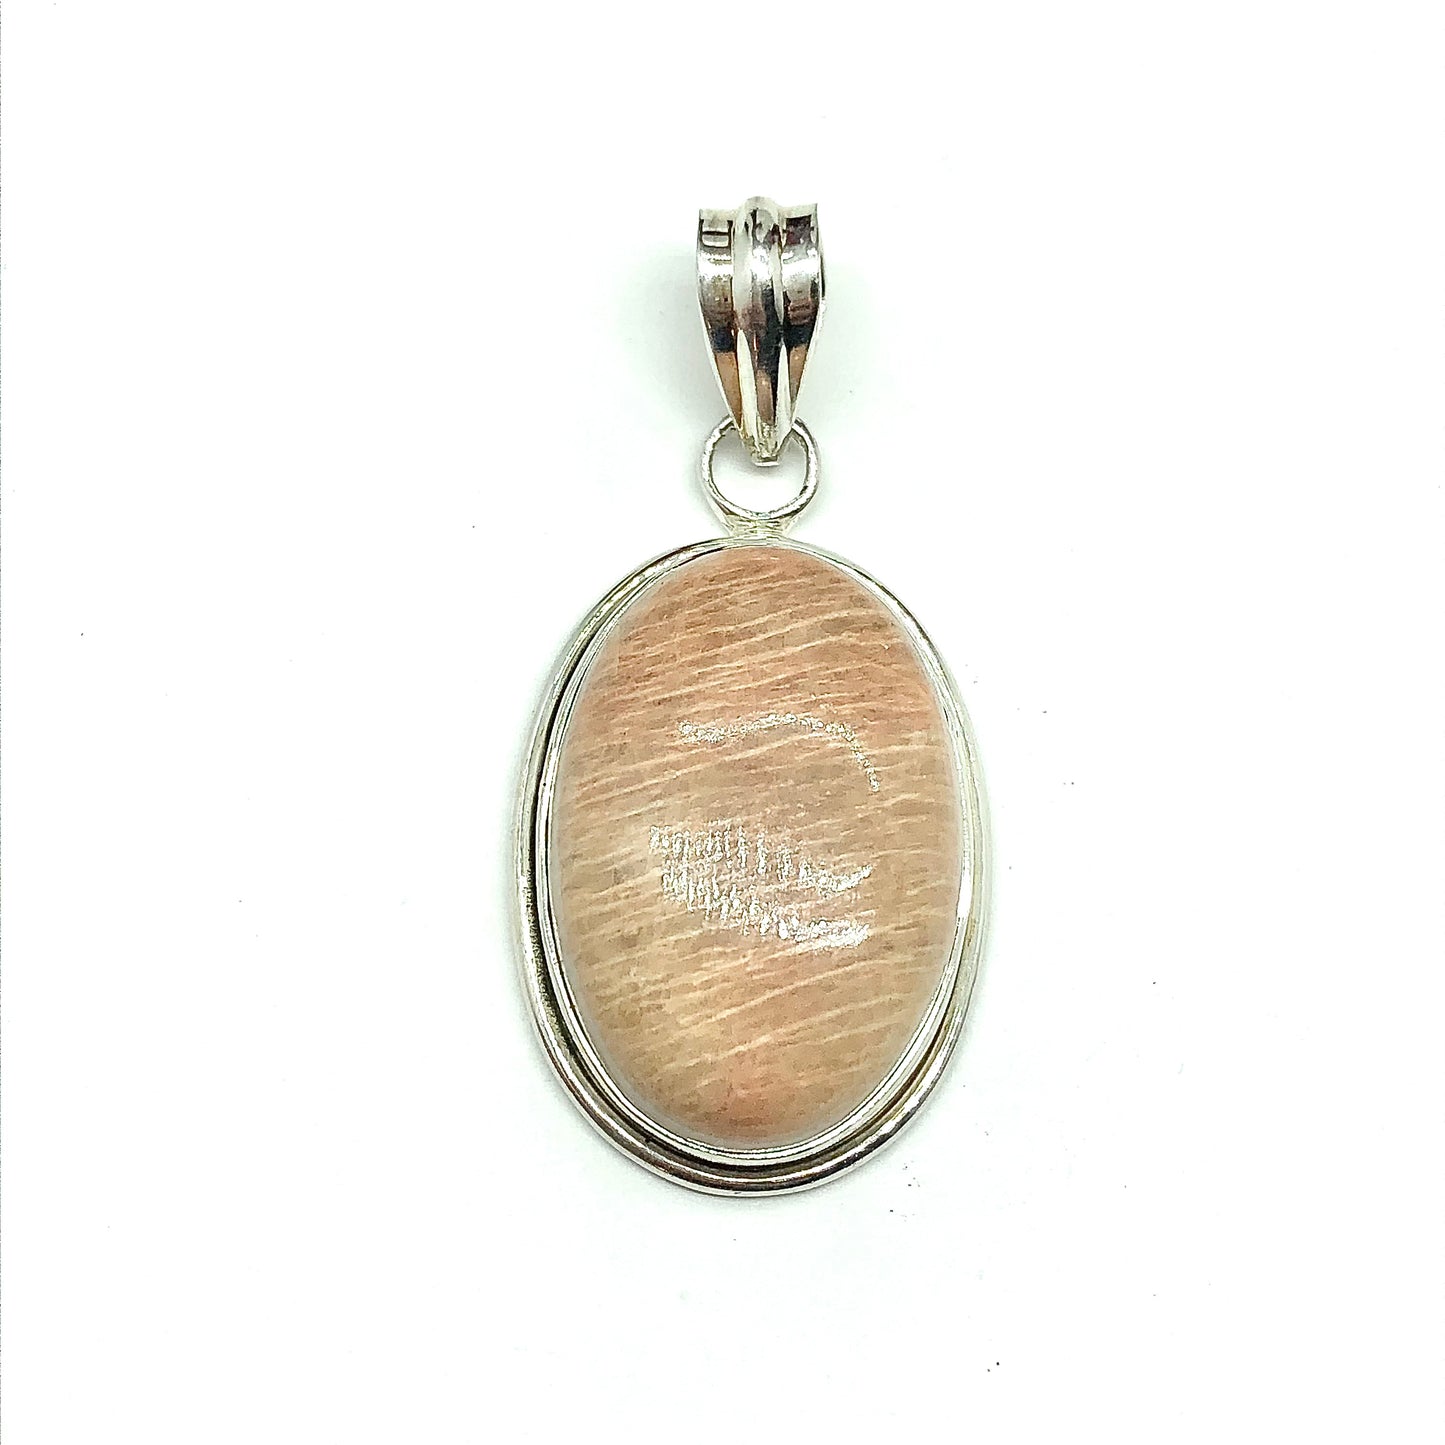 Womens Pendants Sterling Silver Oval Agate Stone Pendant Unique Neutral Tone Style - Blingschlingers Jewelry